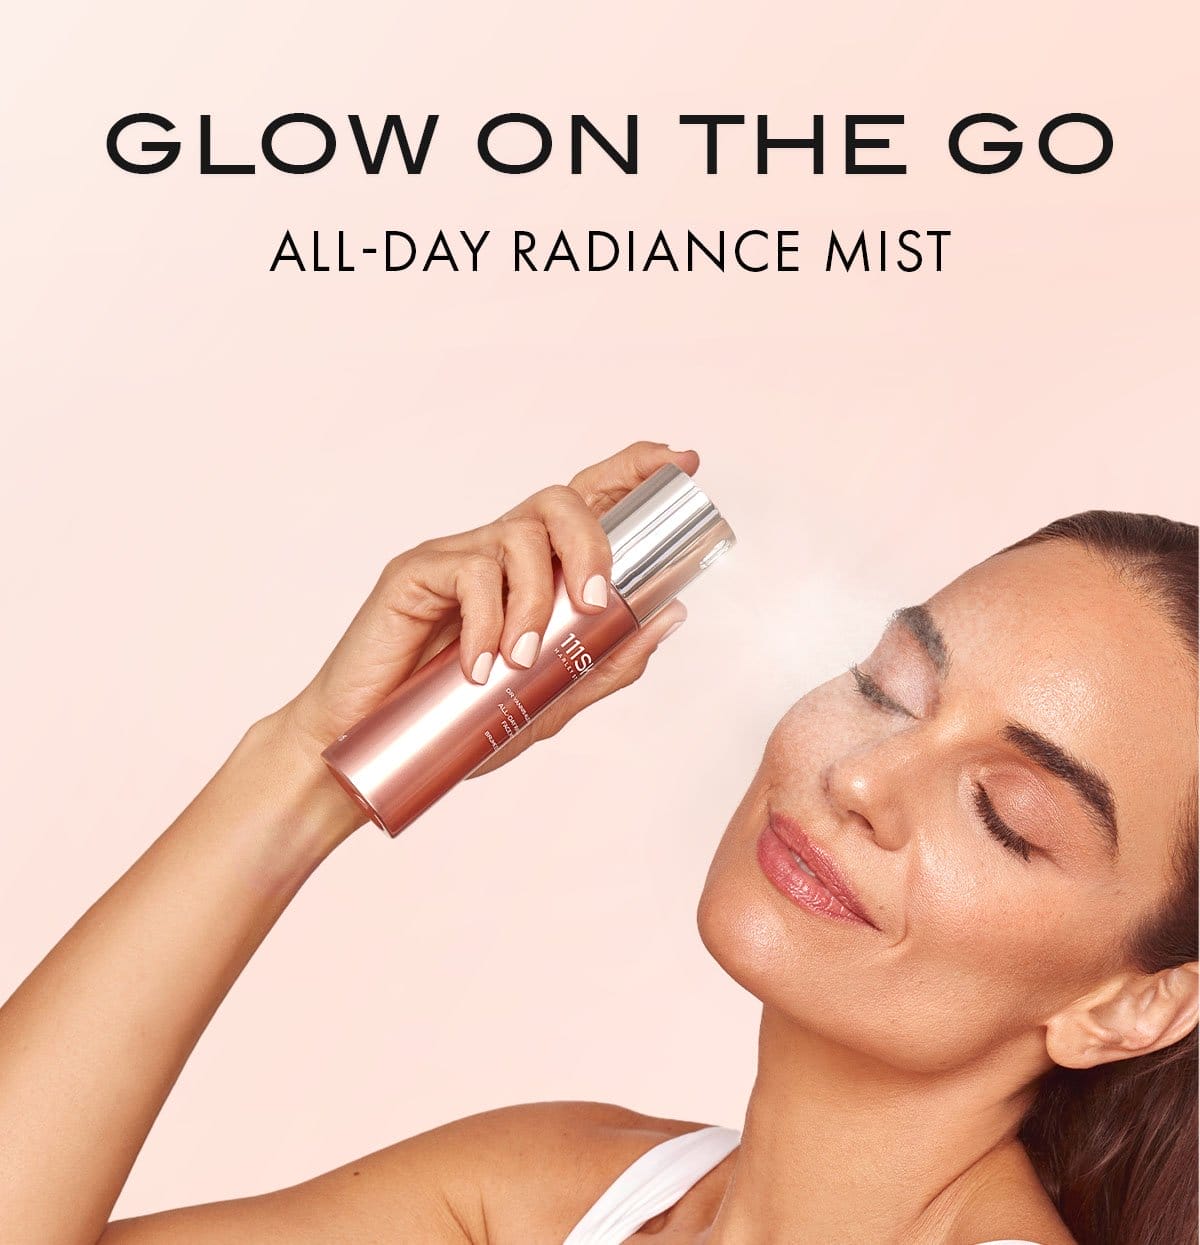 ALL DAY RADIANCE MIST | Glowing Radiance Instantly At Home And On-The-Go\u200b.